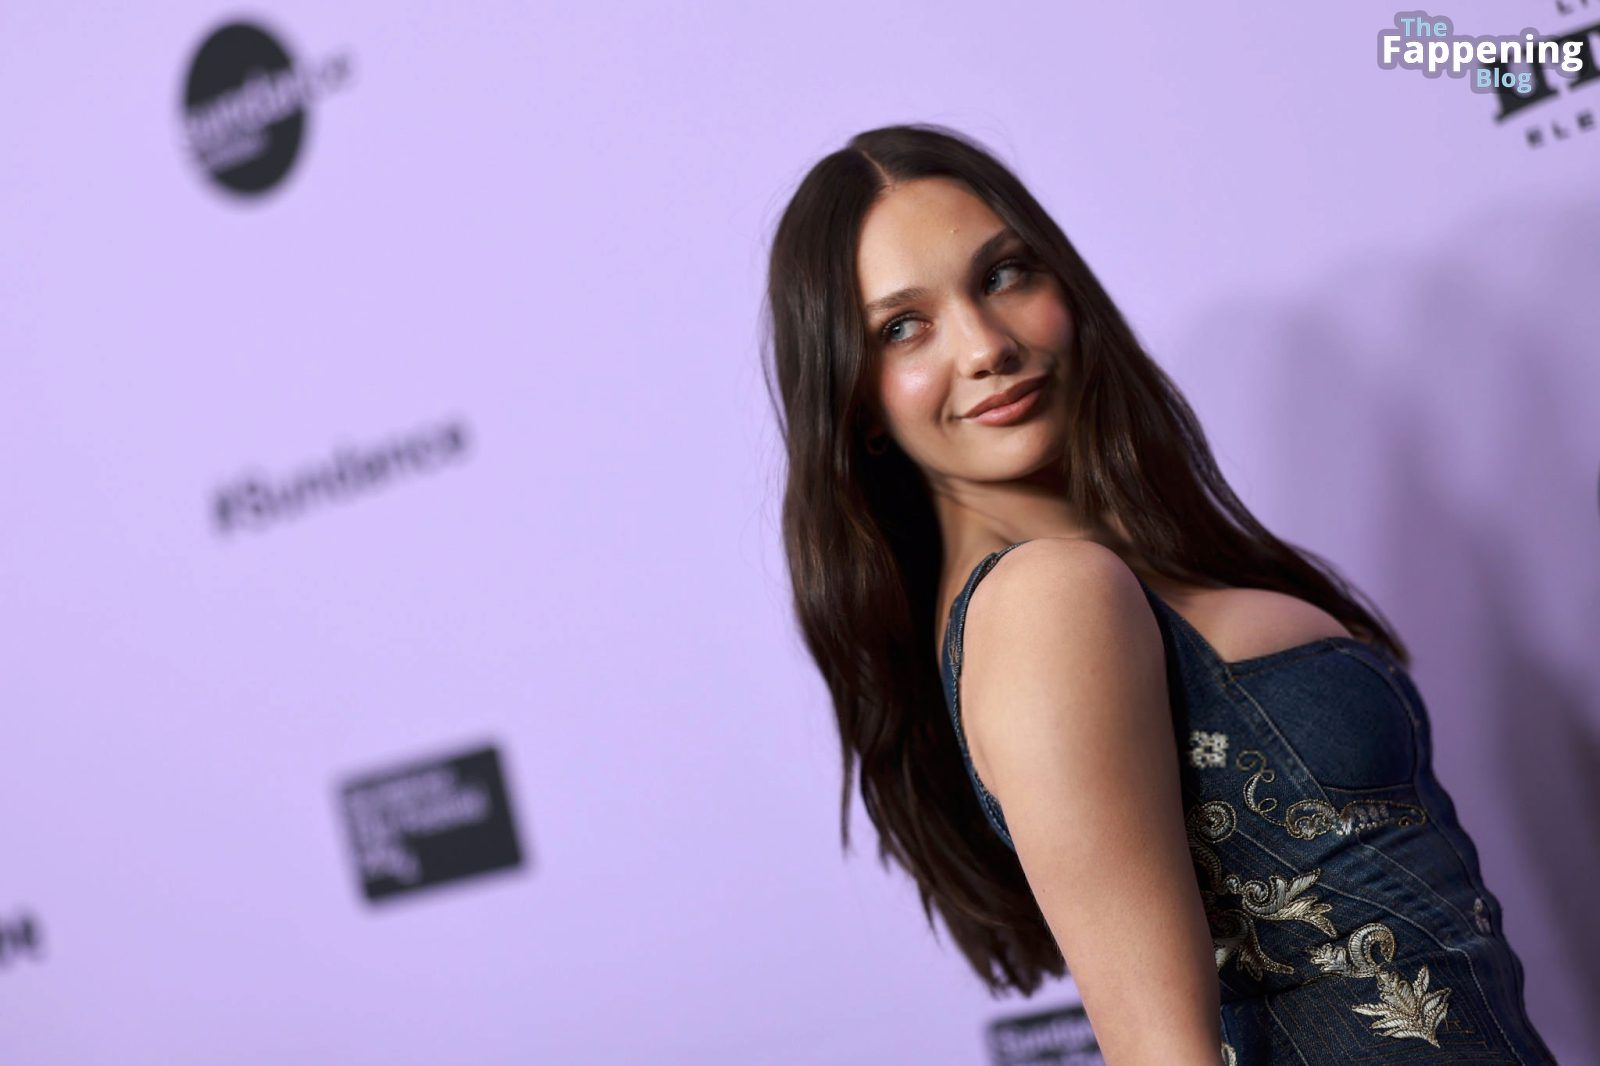 Maddie-Ziegler-My-Old-Ass-Premiere-Sexy-Cleavage-7-thefappeningblog.com_.jpg